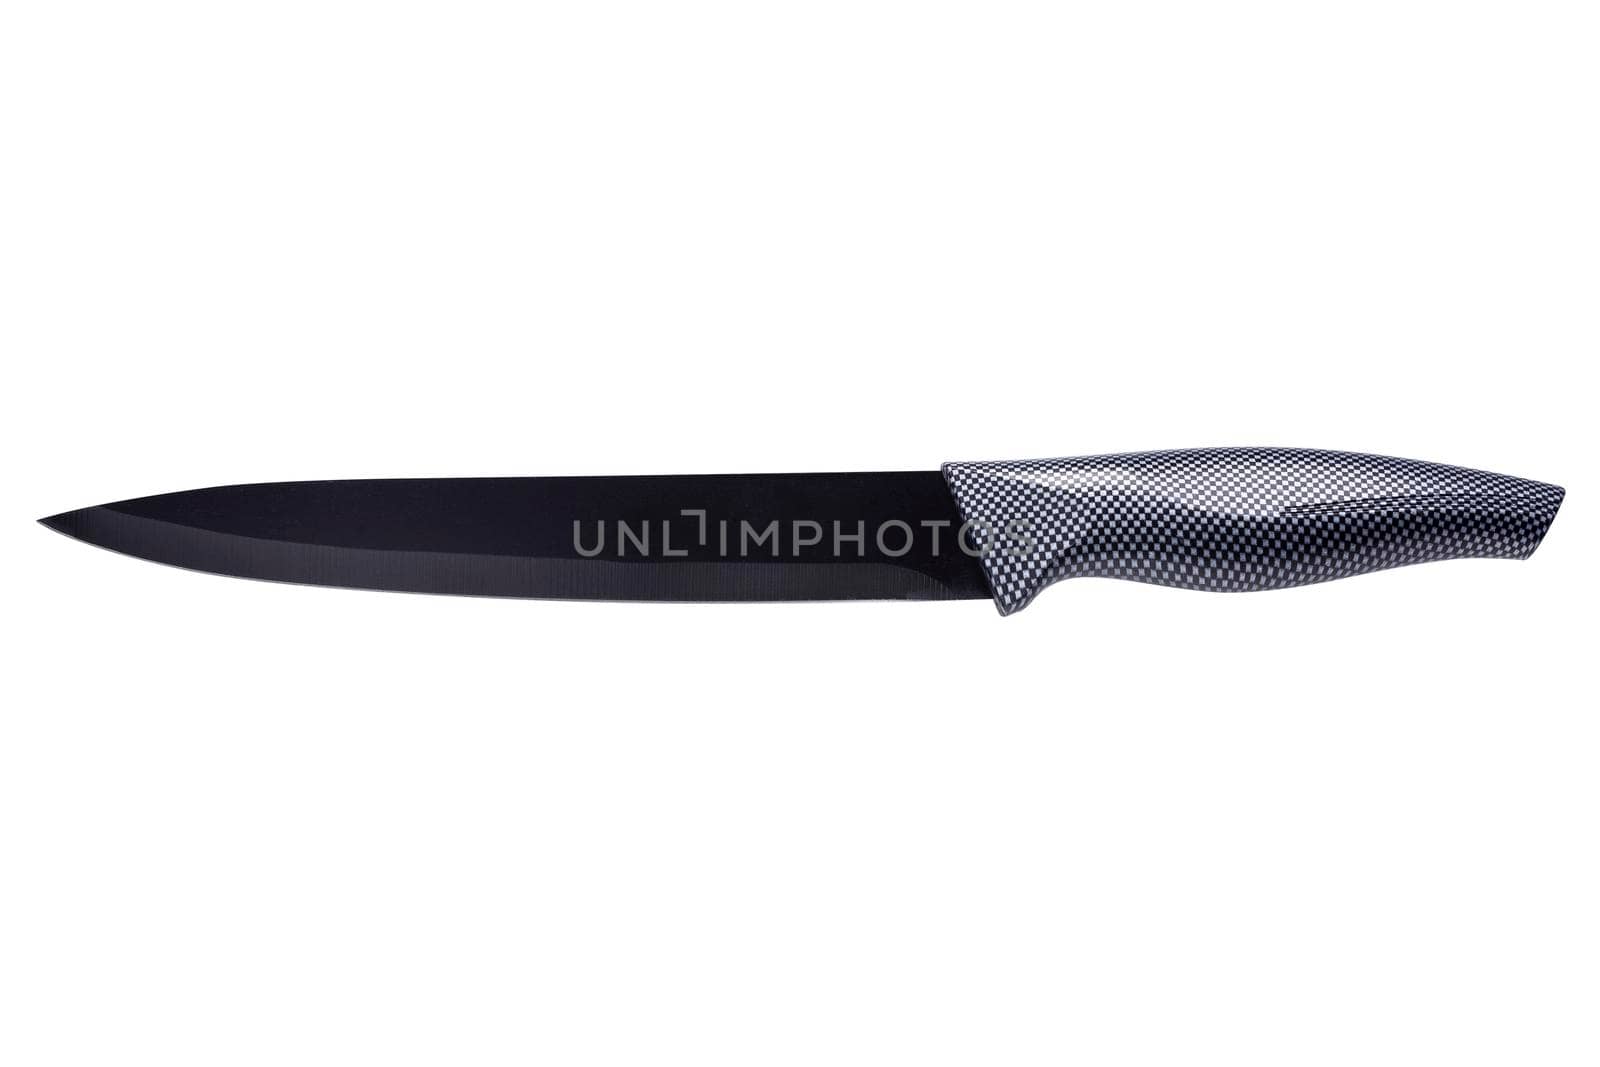 High-quality stainless steel professional slicing knife with black non-stick antibacterial coating.  Ideal for professional and semi-professional use, isolated on white with clipping path.